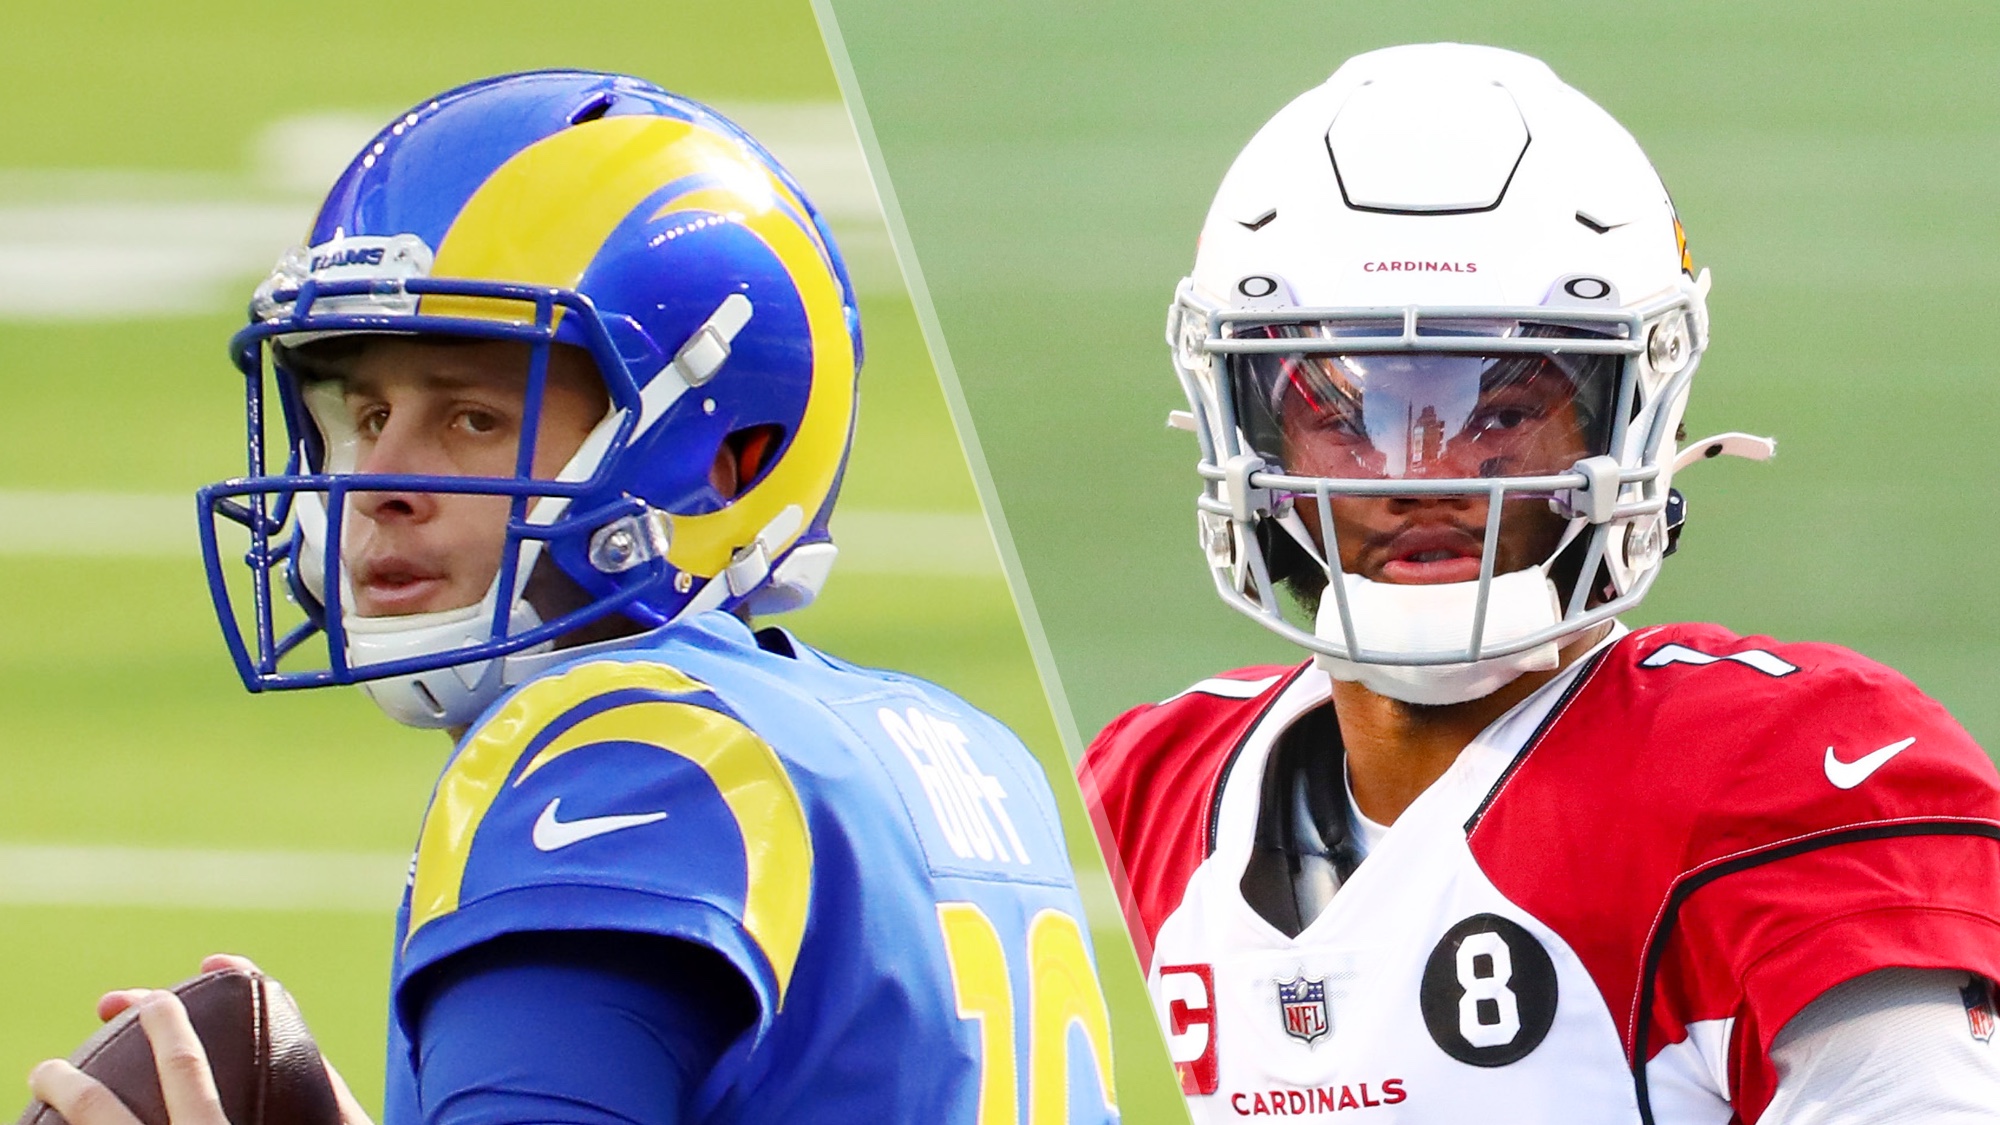 Rams vs Cardinals live stream How to watch NFL week 13